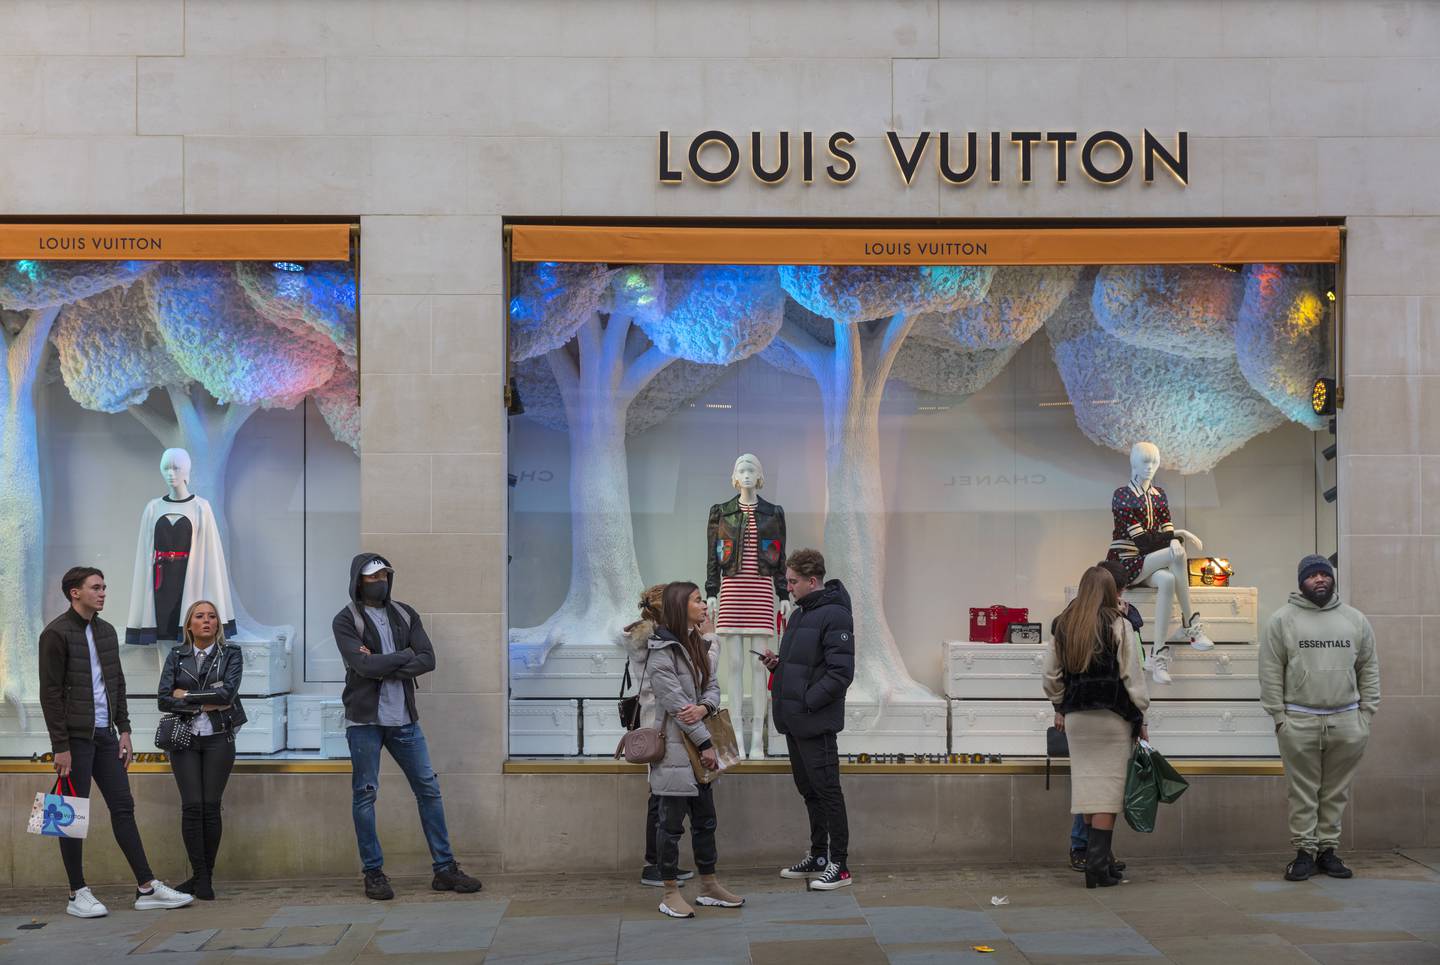 Masked shoppers queuing outside the Louis Vuitton store In London's Bond Street. Getty Images.